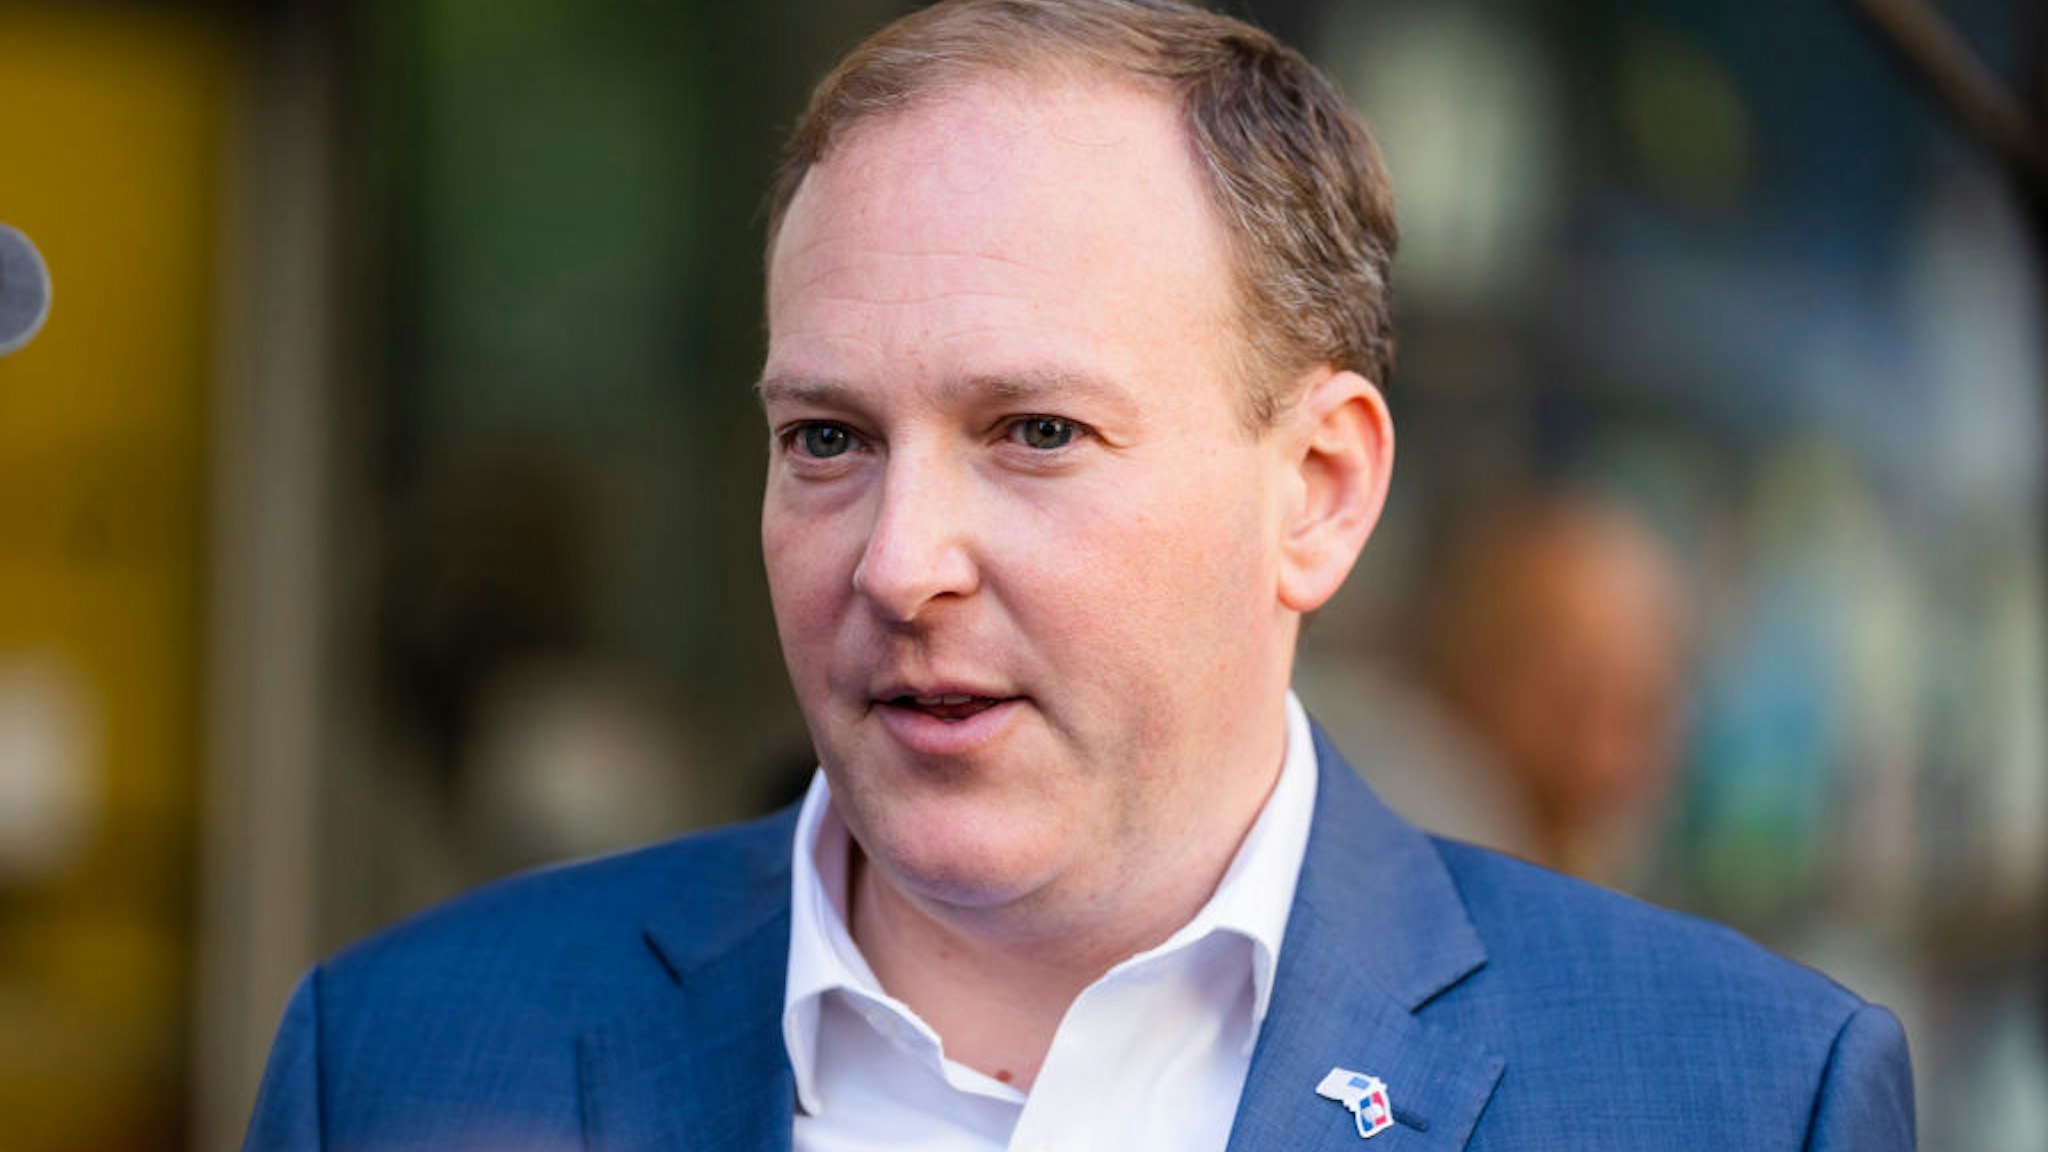 New York gubernatorial candidate Lee Zeldin attends the Columbus Day Parade in Midtown on October 10, 2022 in New York City.